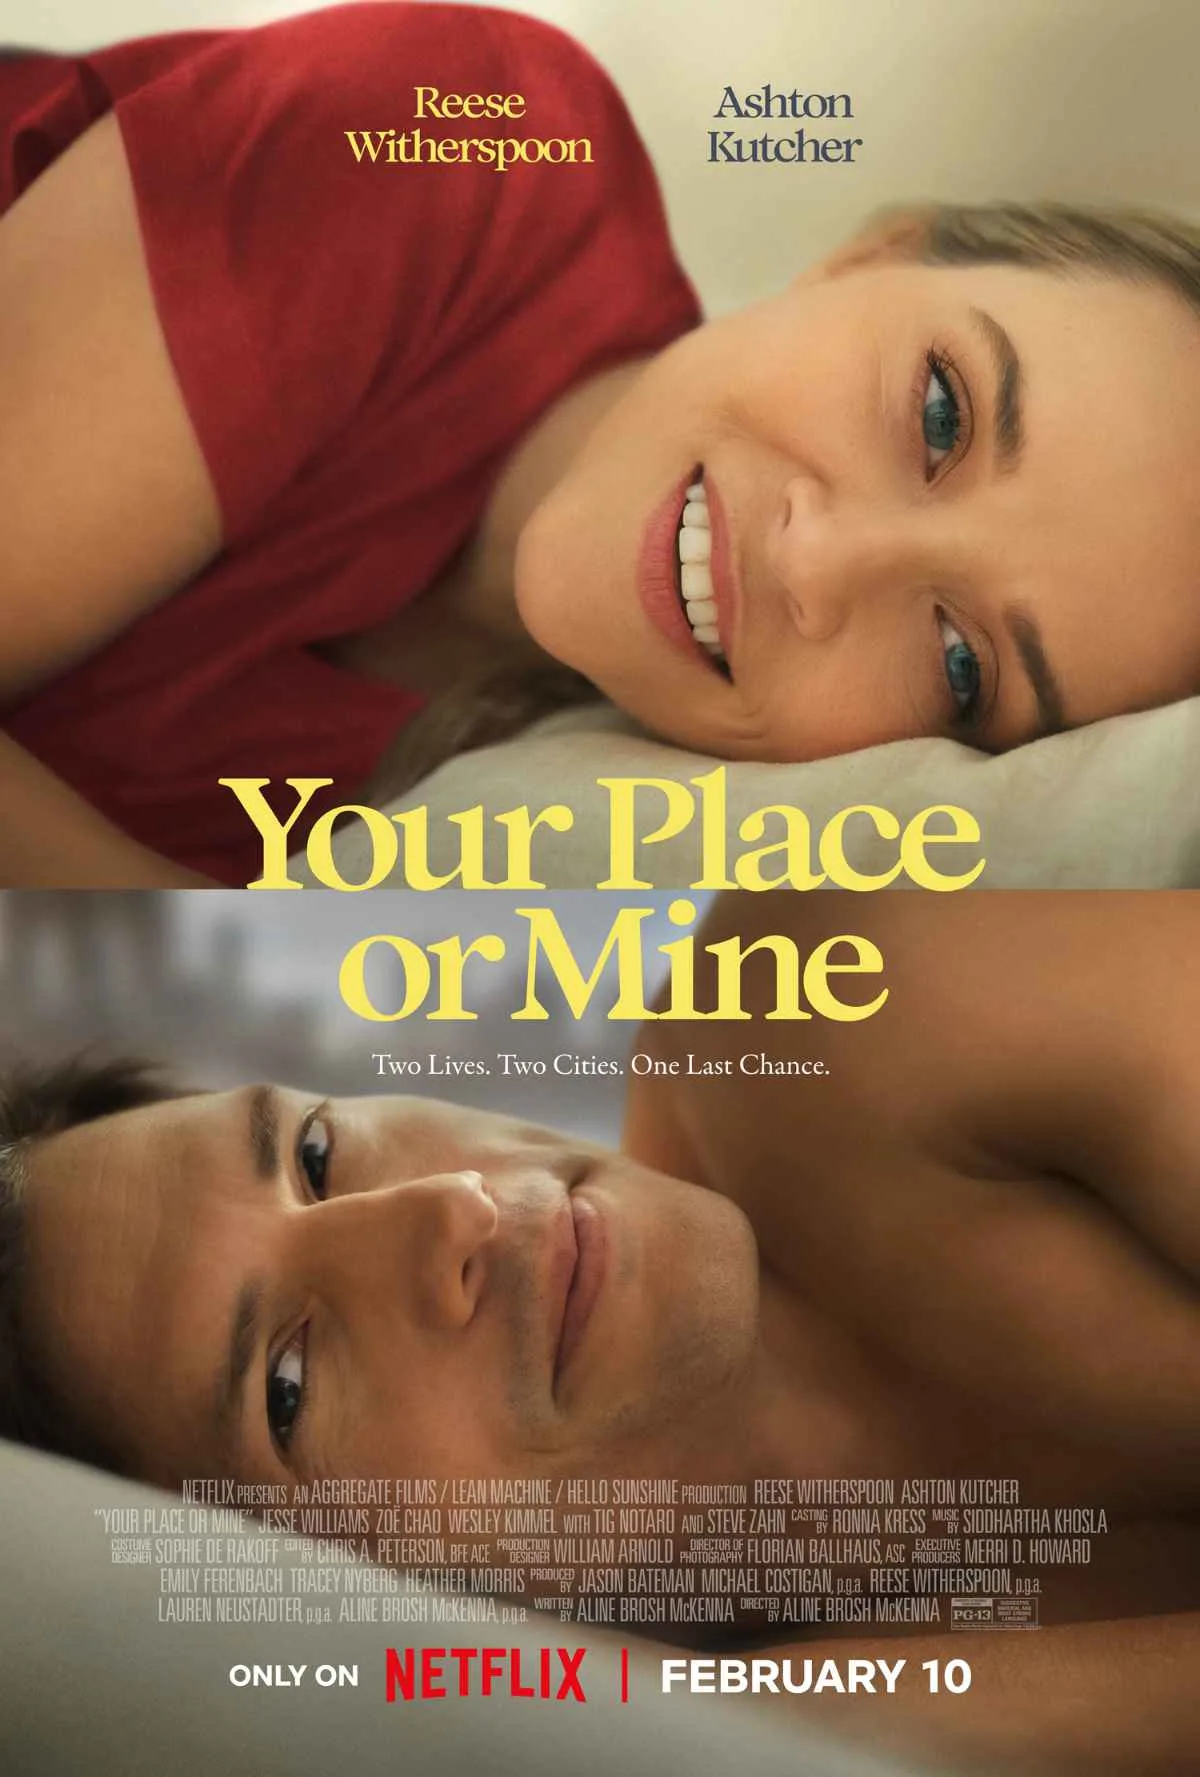 Your Place or Mine Cast